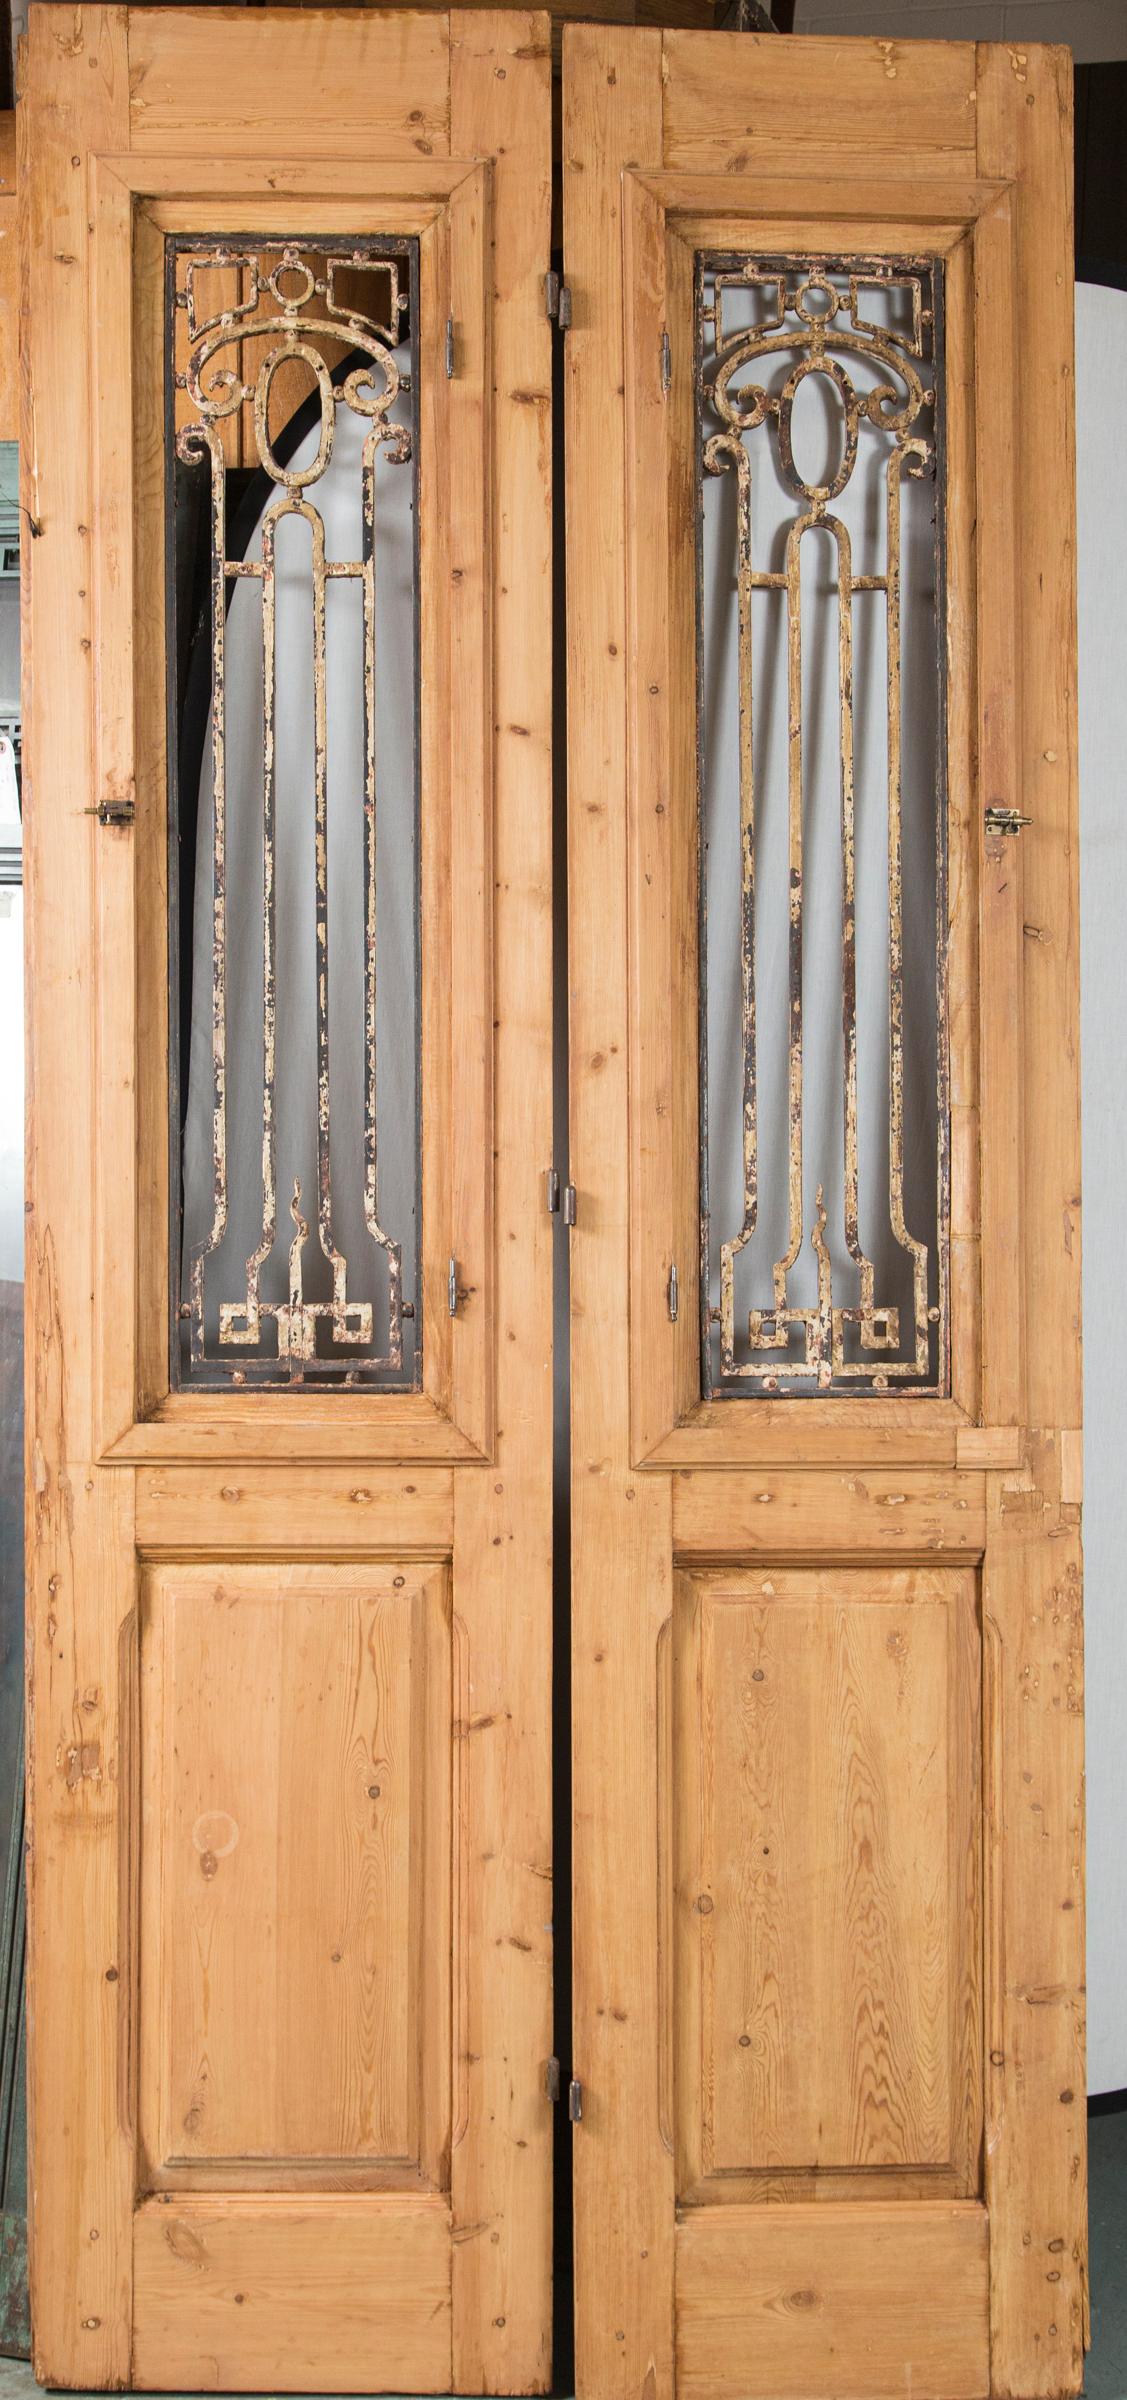 Wood Set of Vintage Doors from Egypt with Original Ironwork